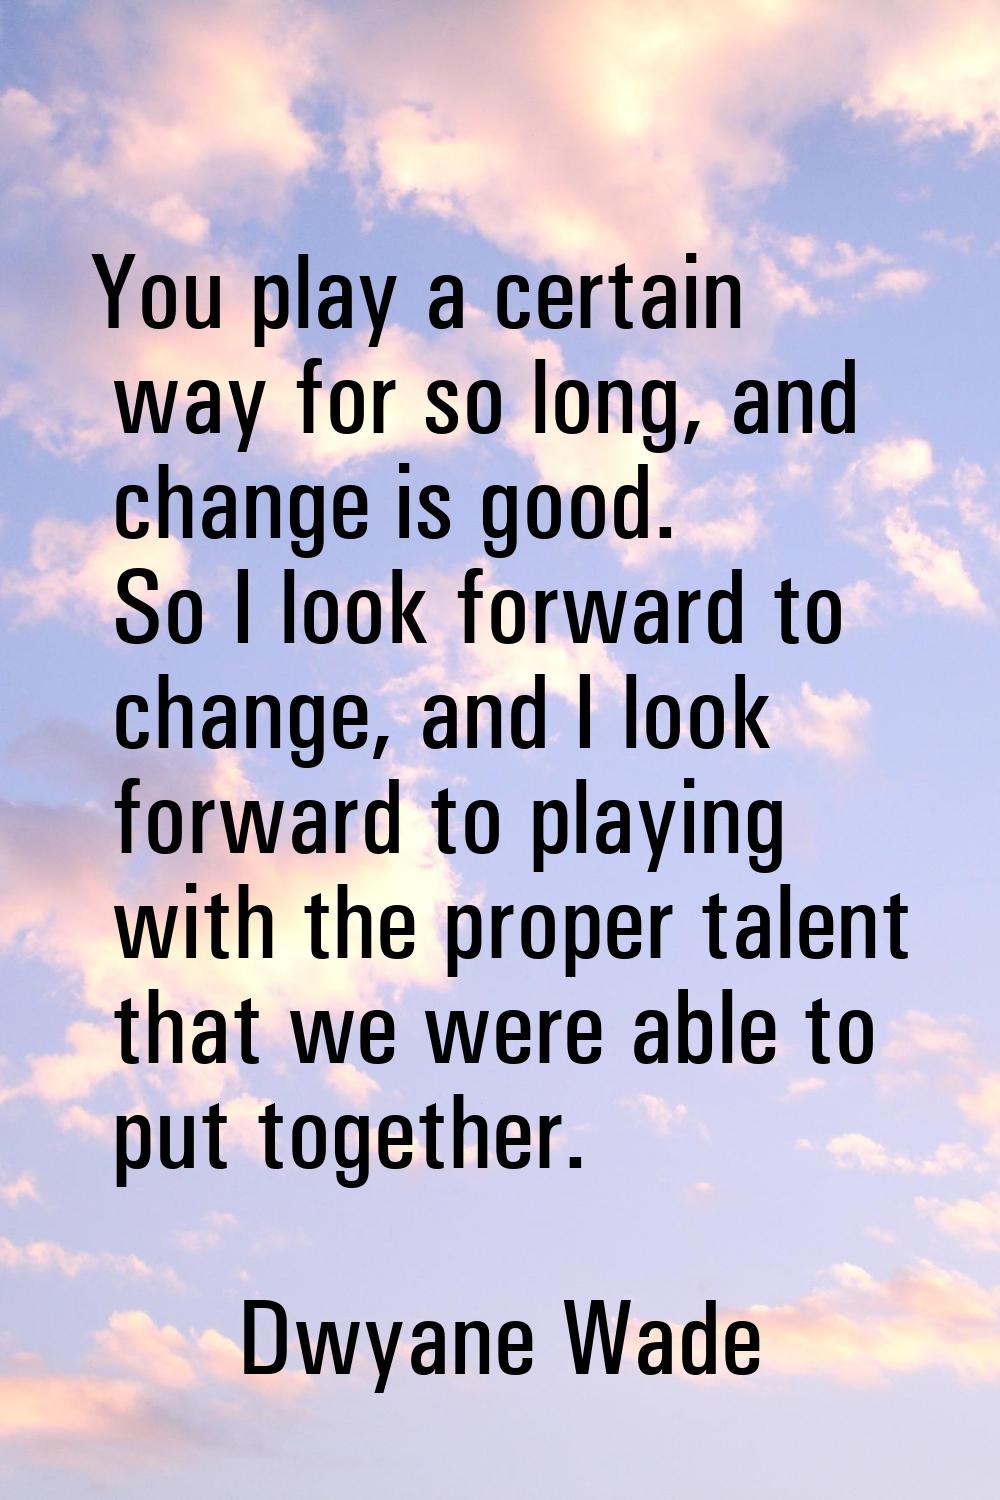 You play a certain way for so long, and change is good. So I look forward to change, and I look for